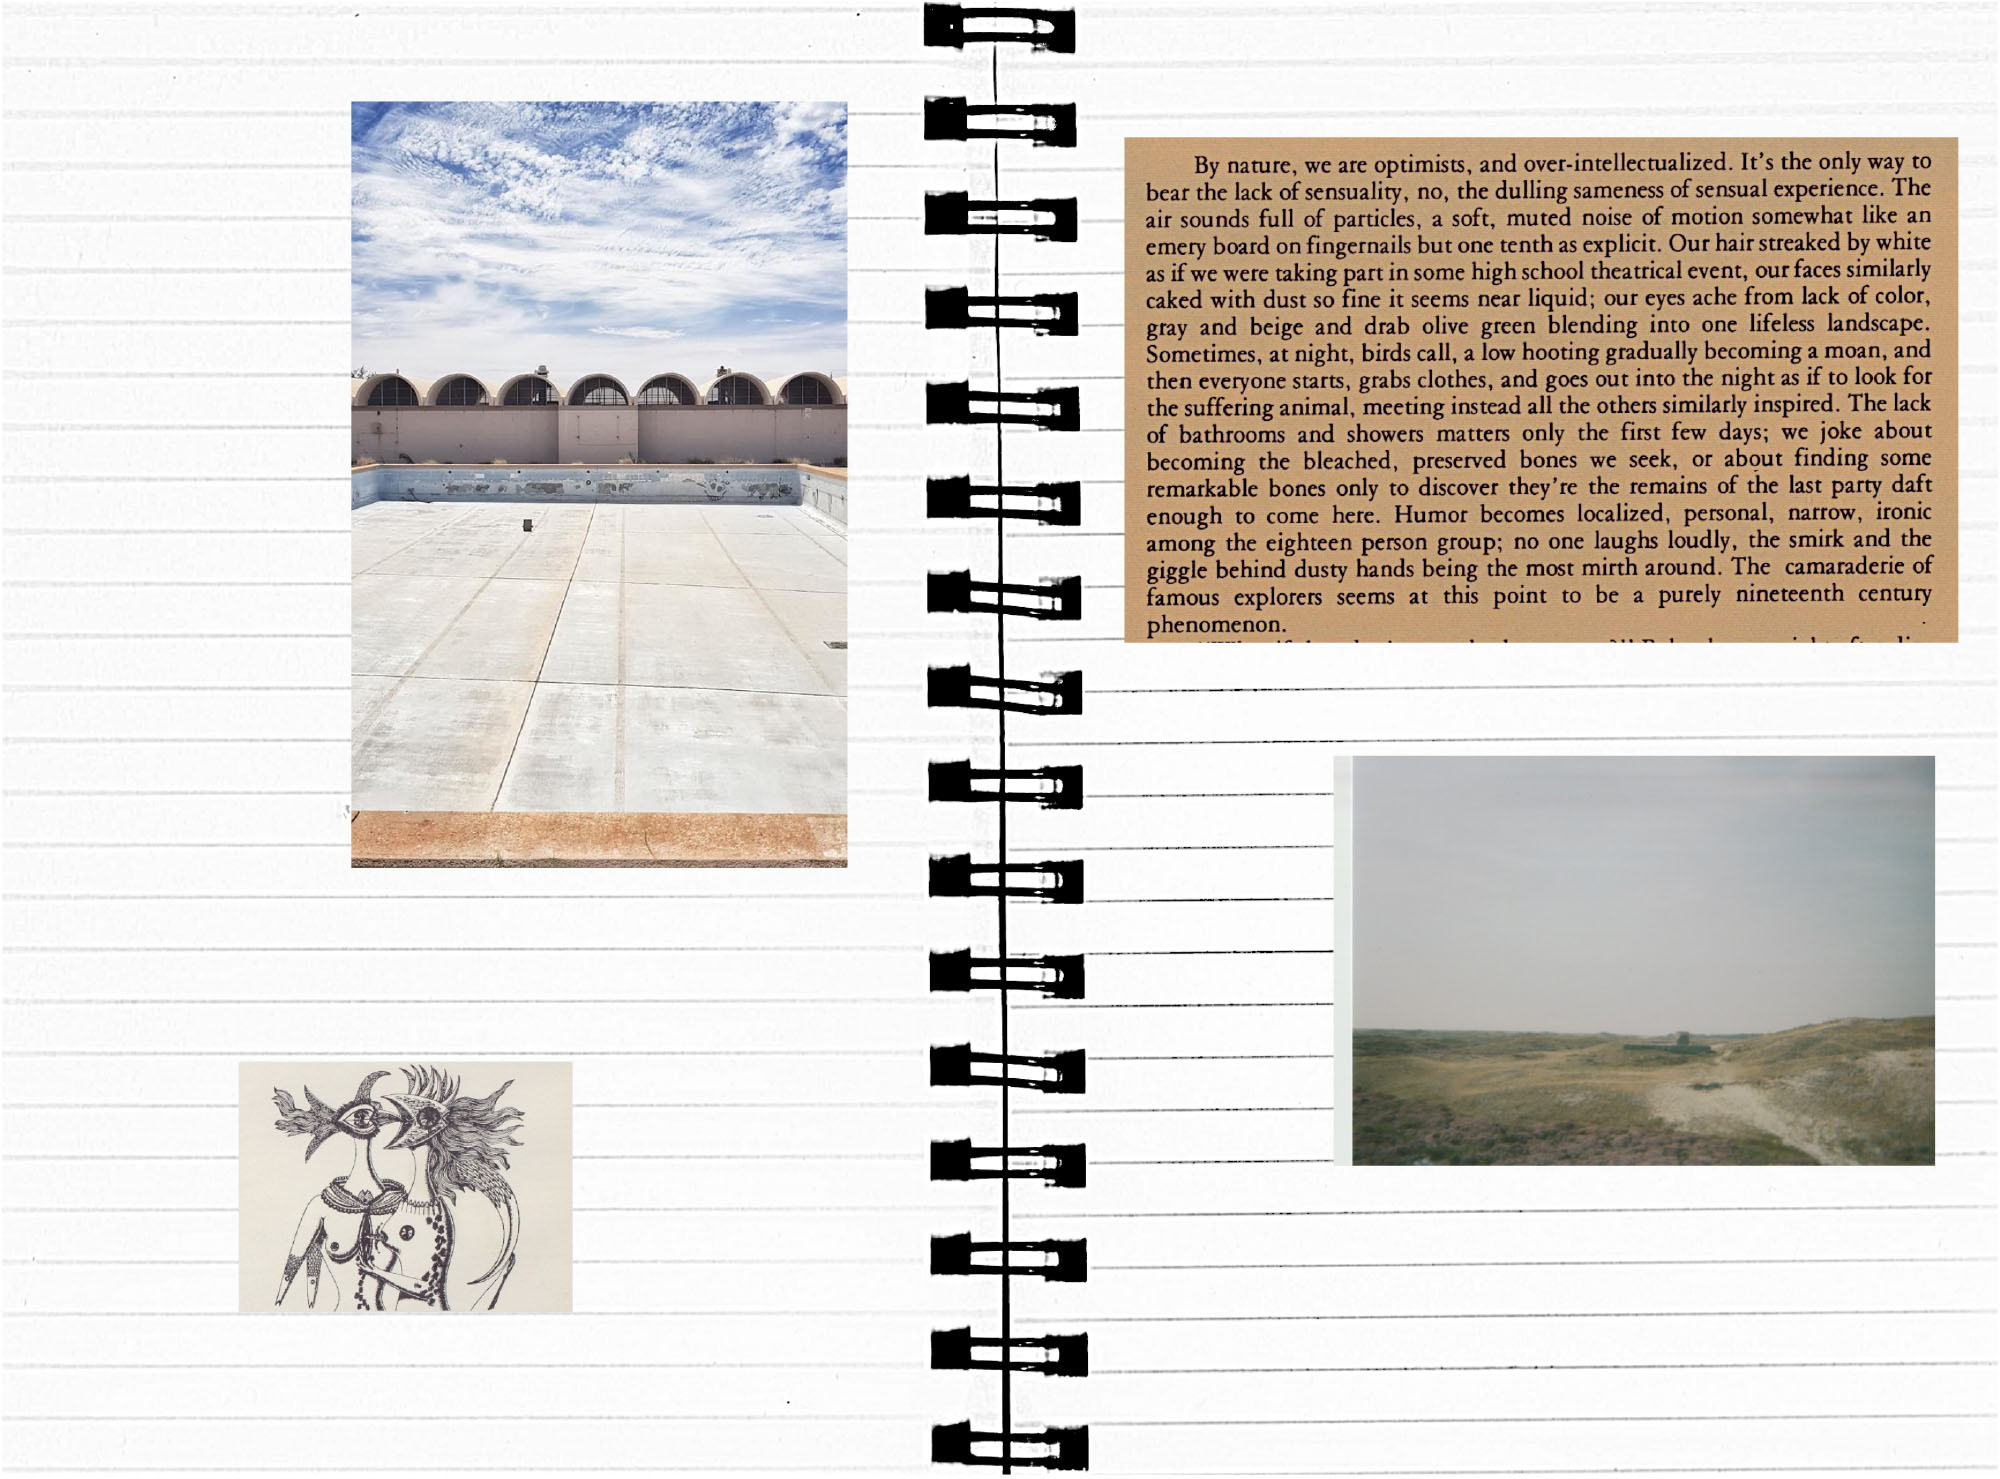 exmouth_scrapbook_notes_on_utopia_final_version-11